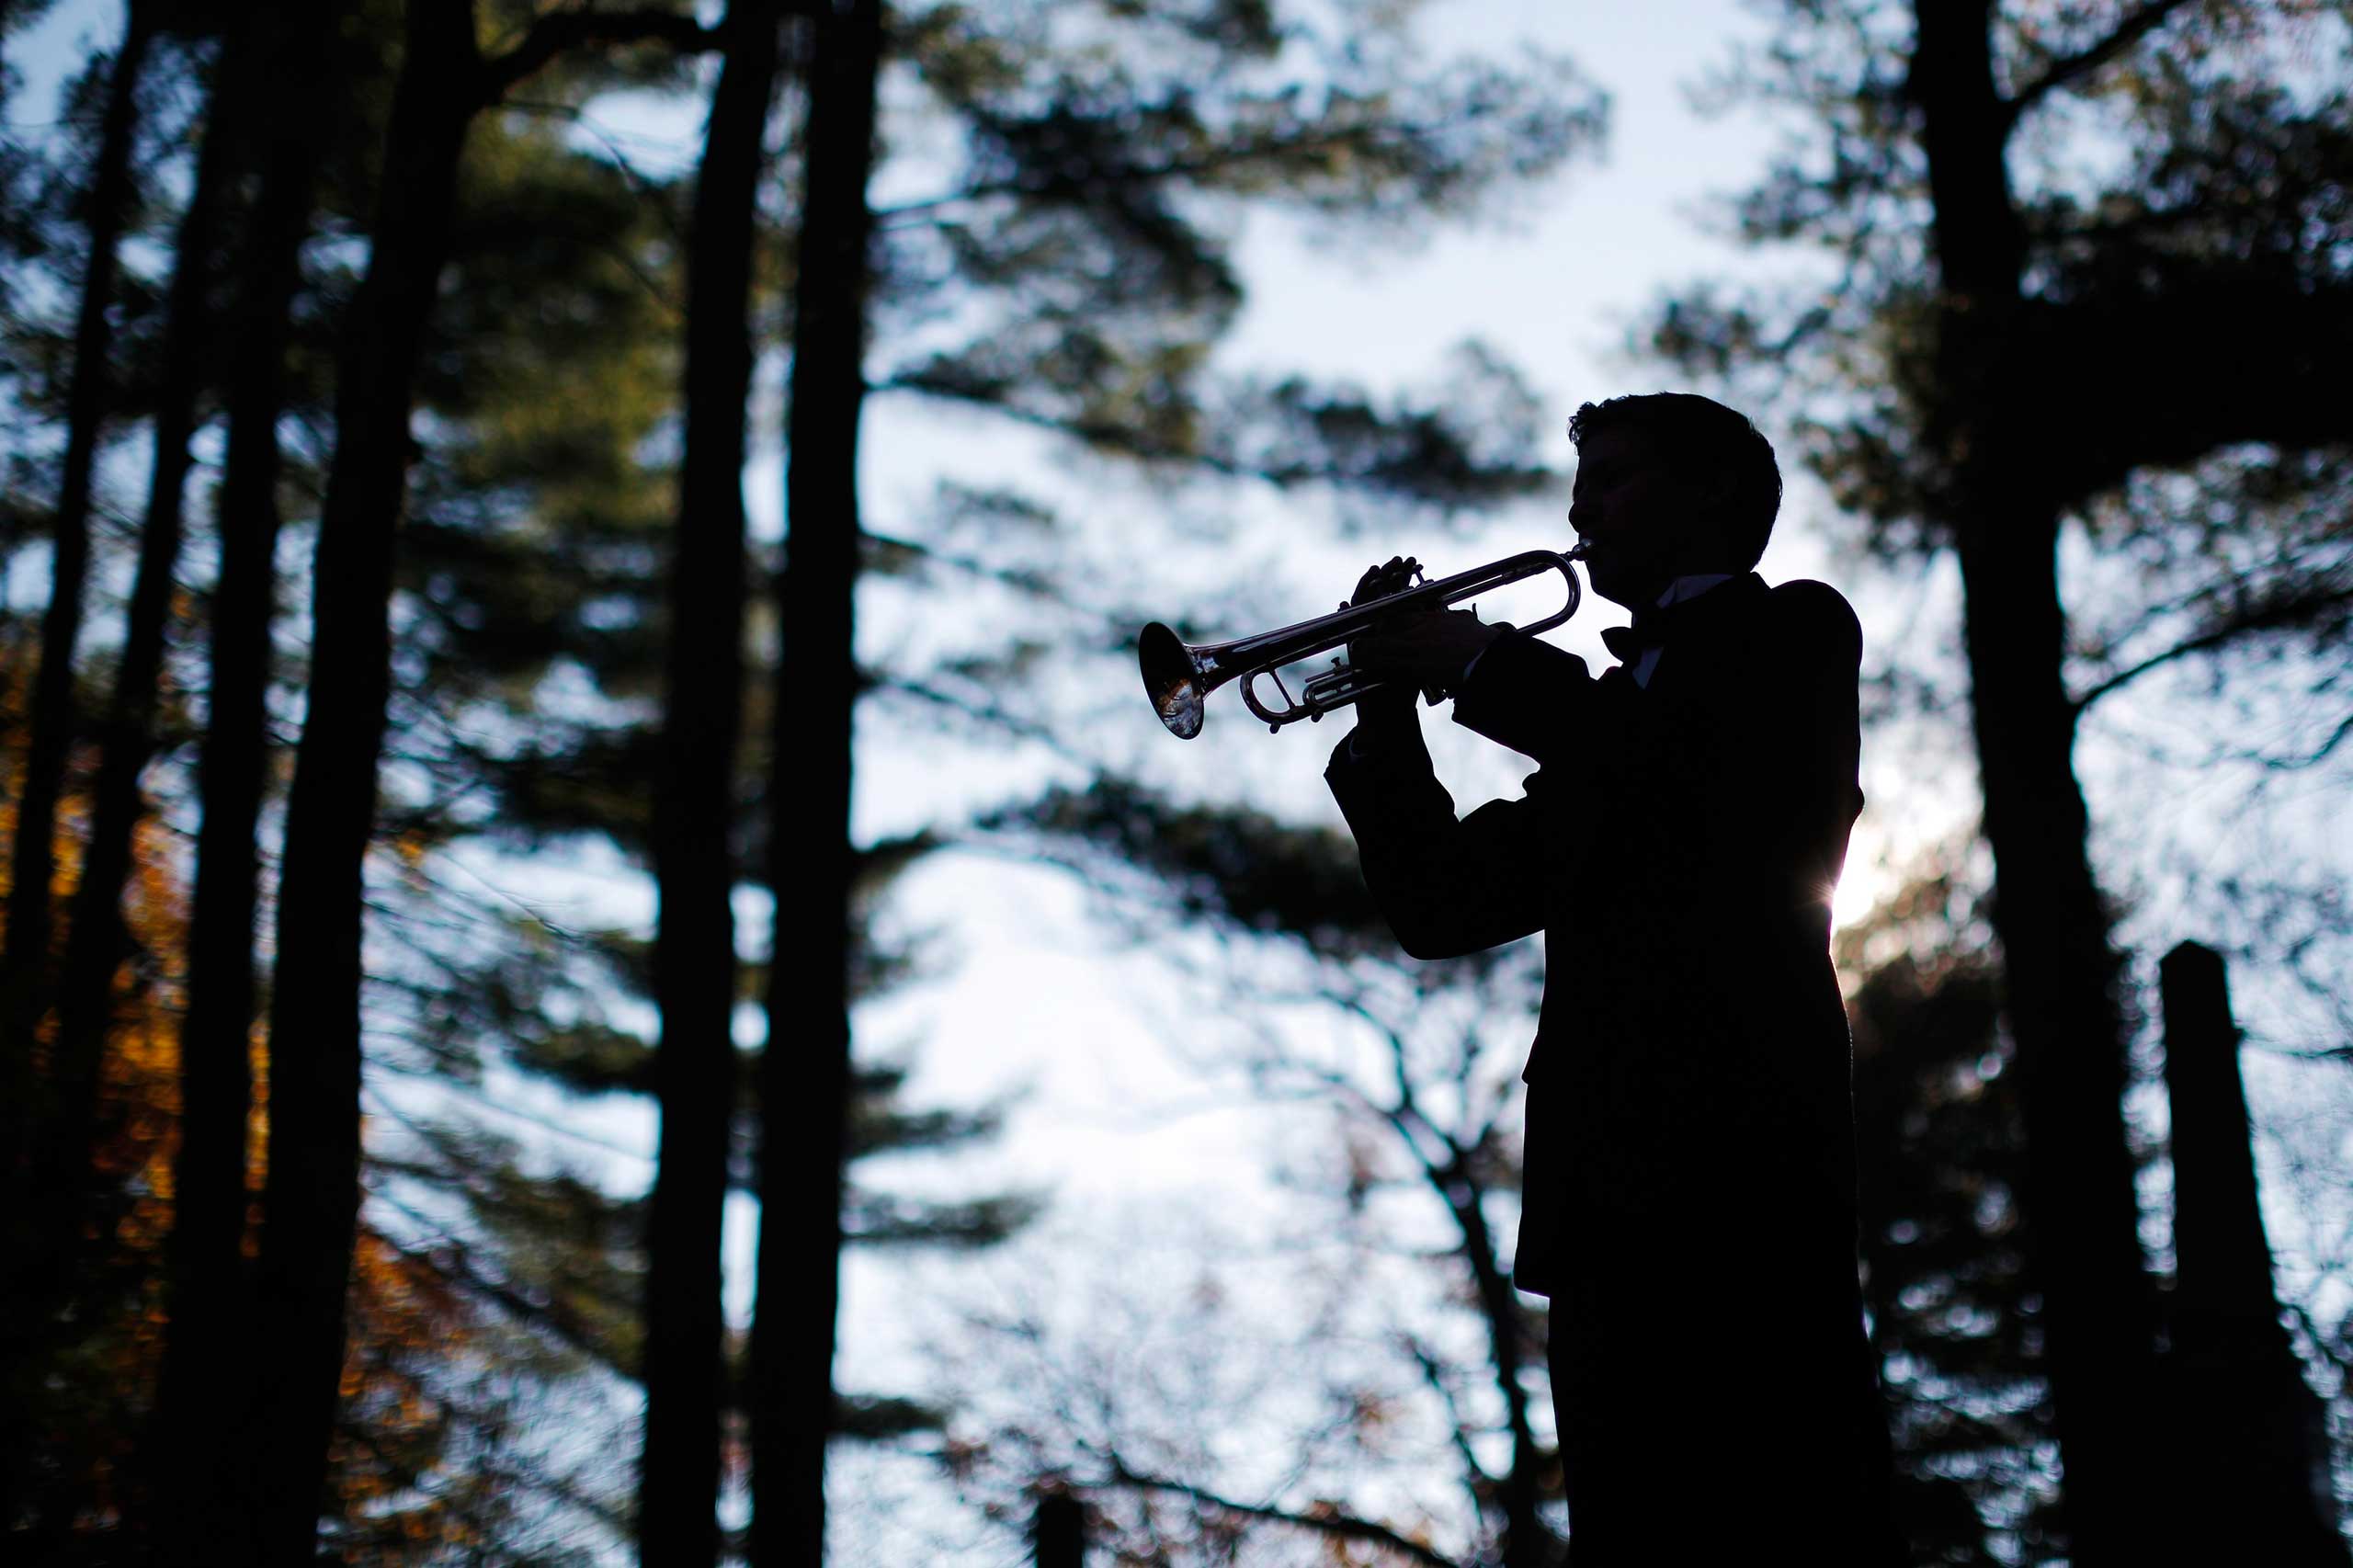 Nov. 11, 2014. Moses Riley plays  Taps  during Veterans Day ceremonies in Concord, Mass.